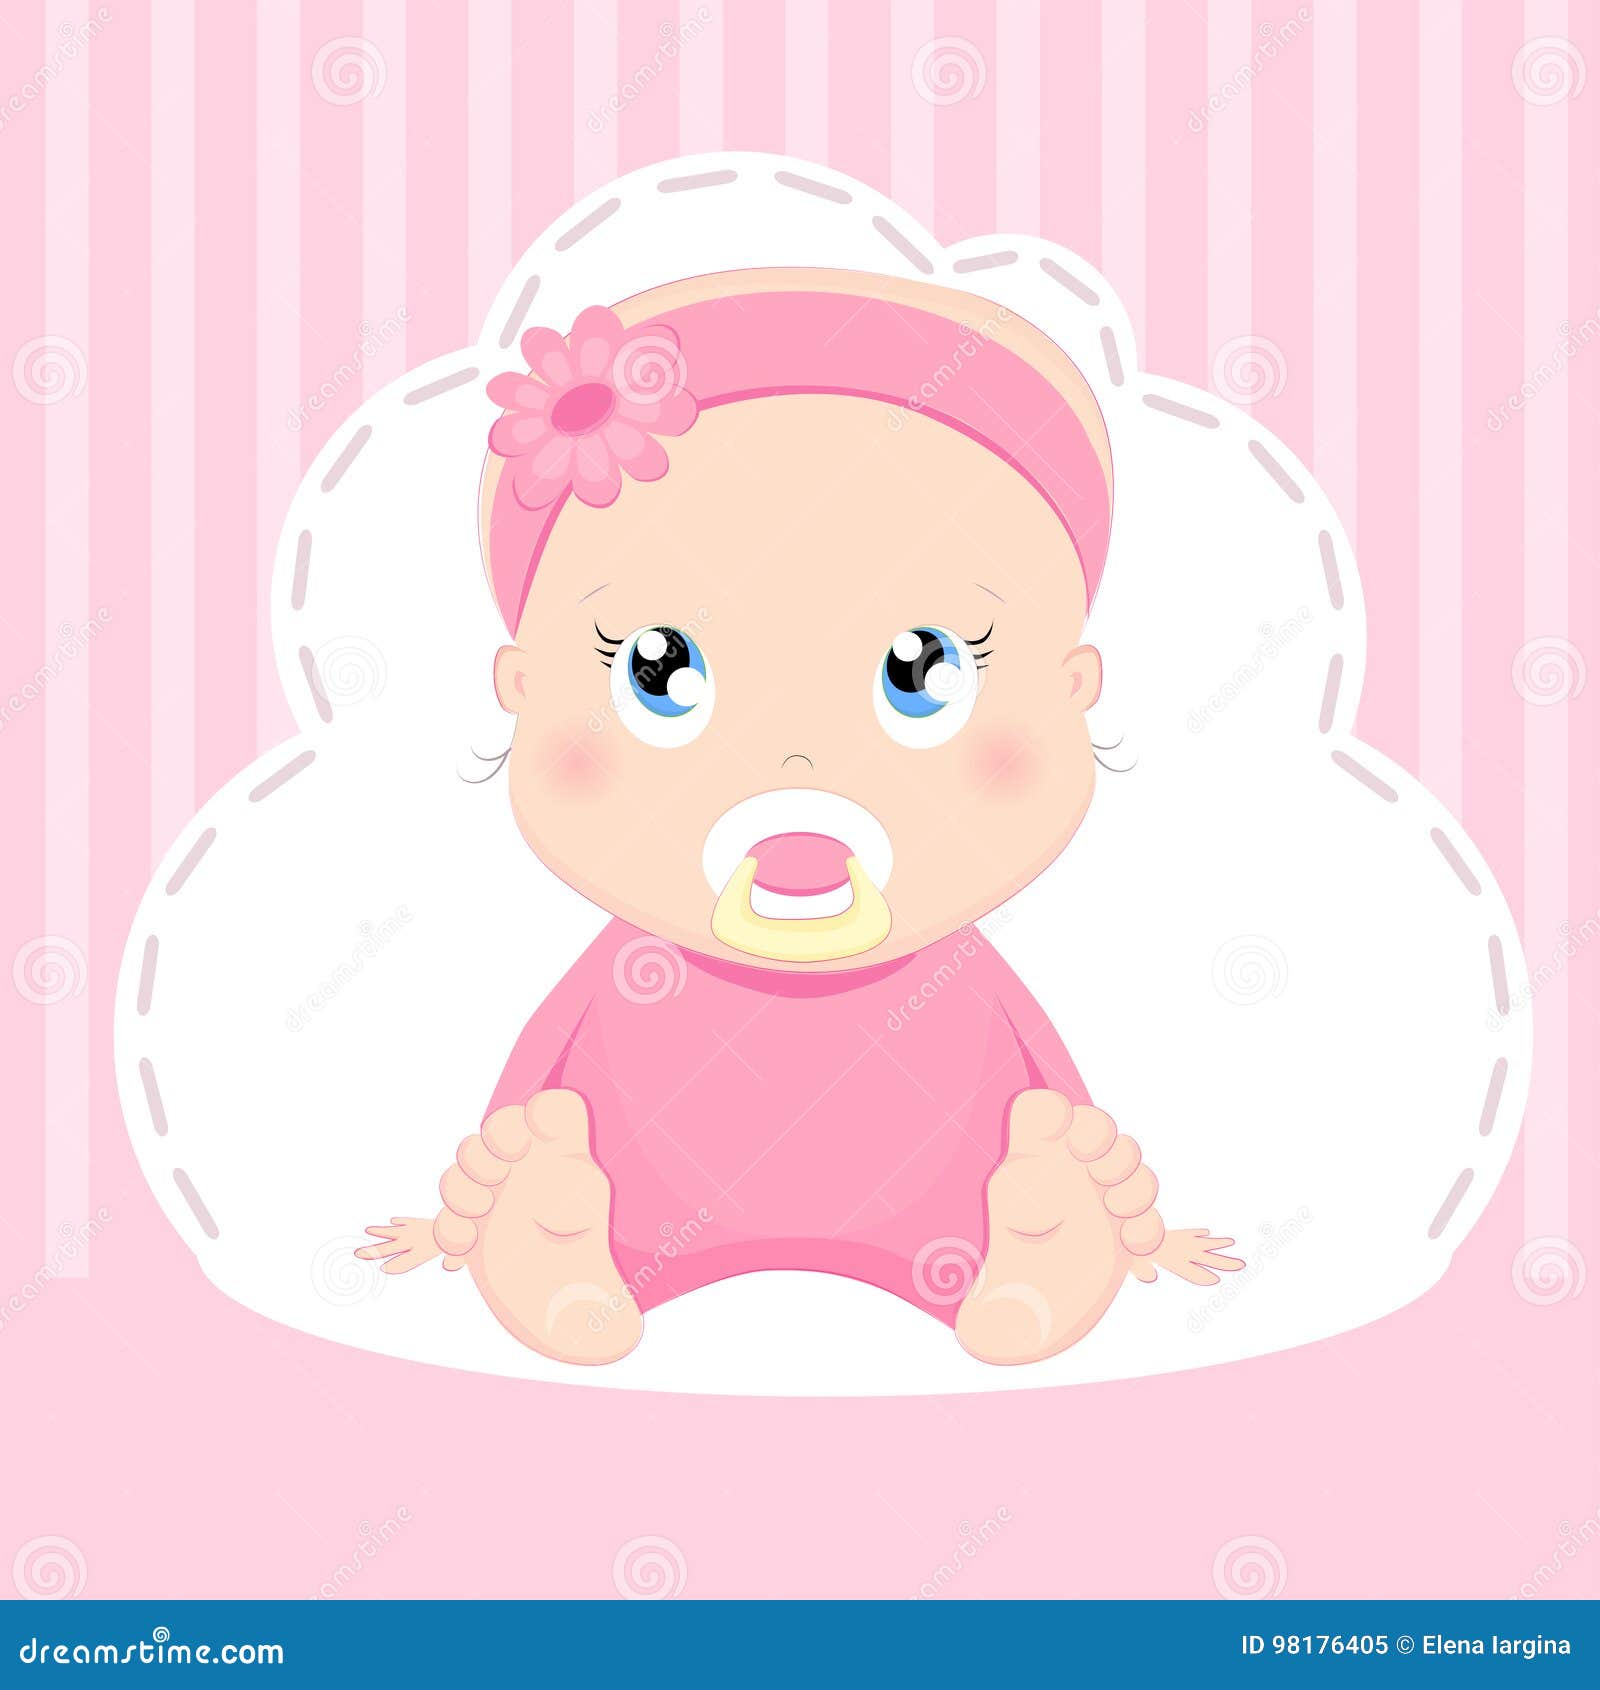 Cute baby girl stock vector. Illustration of pretty, card - 98176405